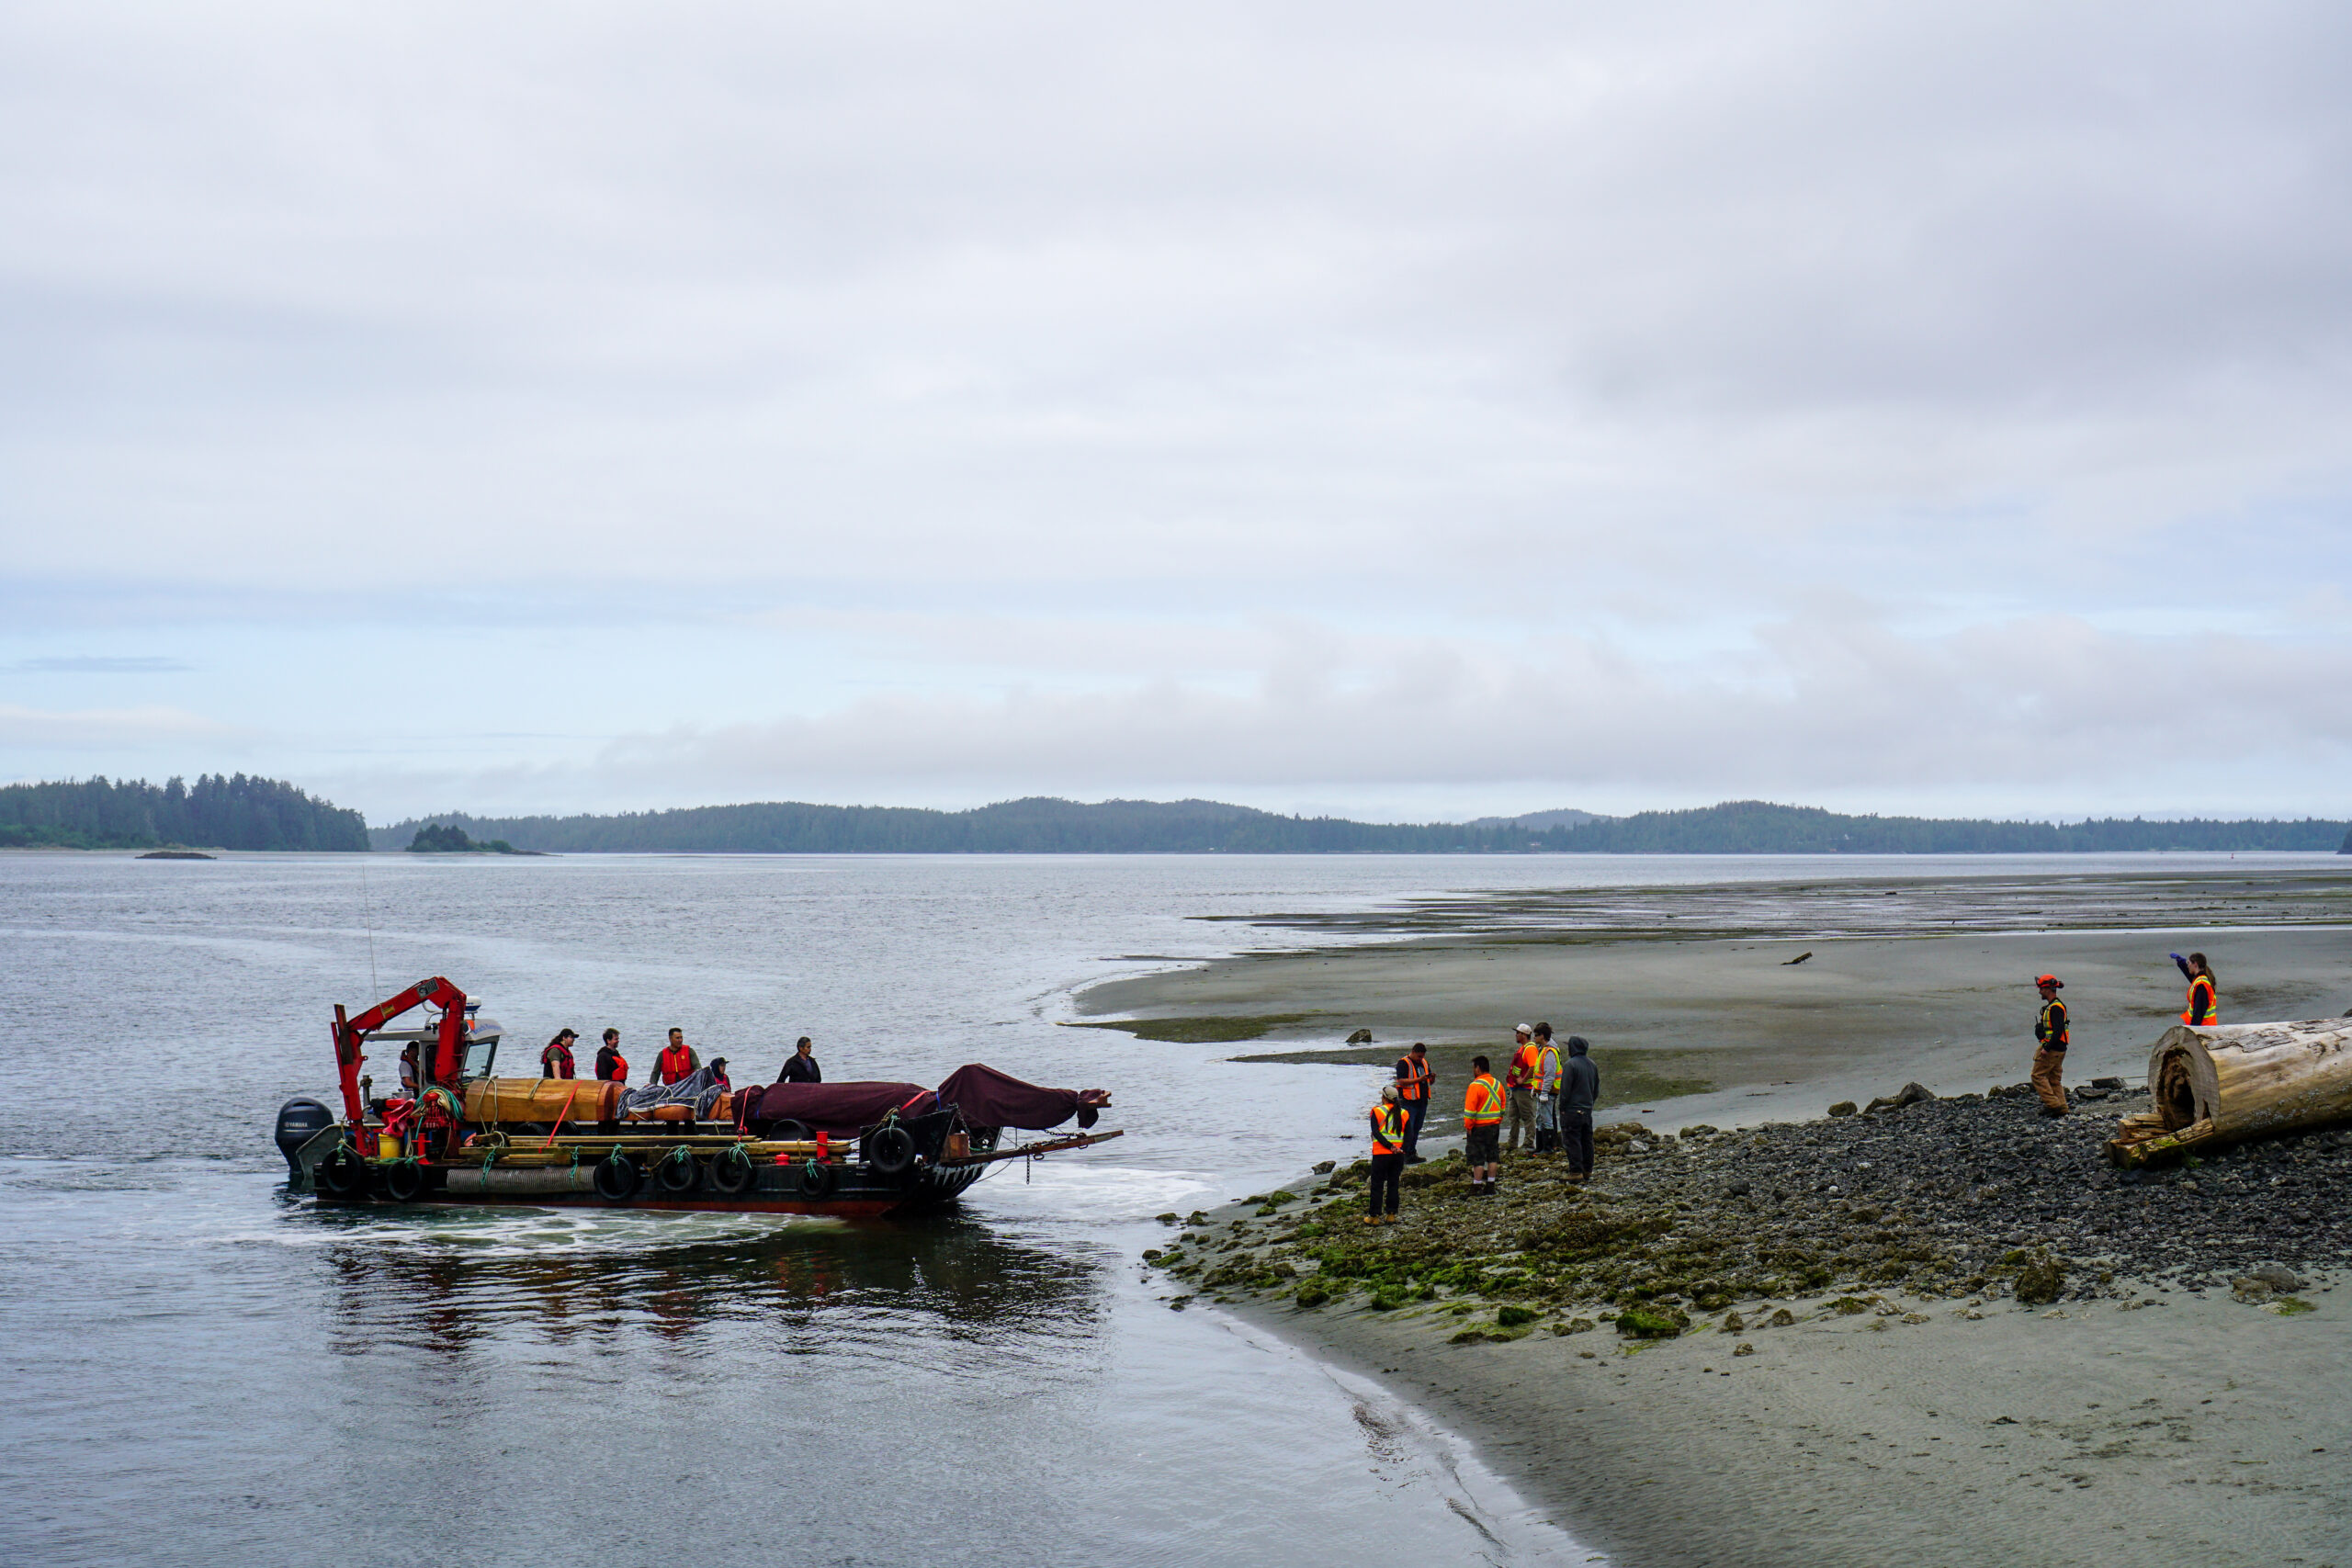 Joe Martin and others carved the totem pole at the Naa'Waya'Sum Gardens in Tofino, B.C. They then lifted the almost 10 metre pole onto a truck, then onto a barge and brought it across the water to the Tla-o-qui-aht village Opitsaht to be raised on July 1, 2022. 